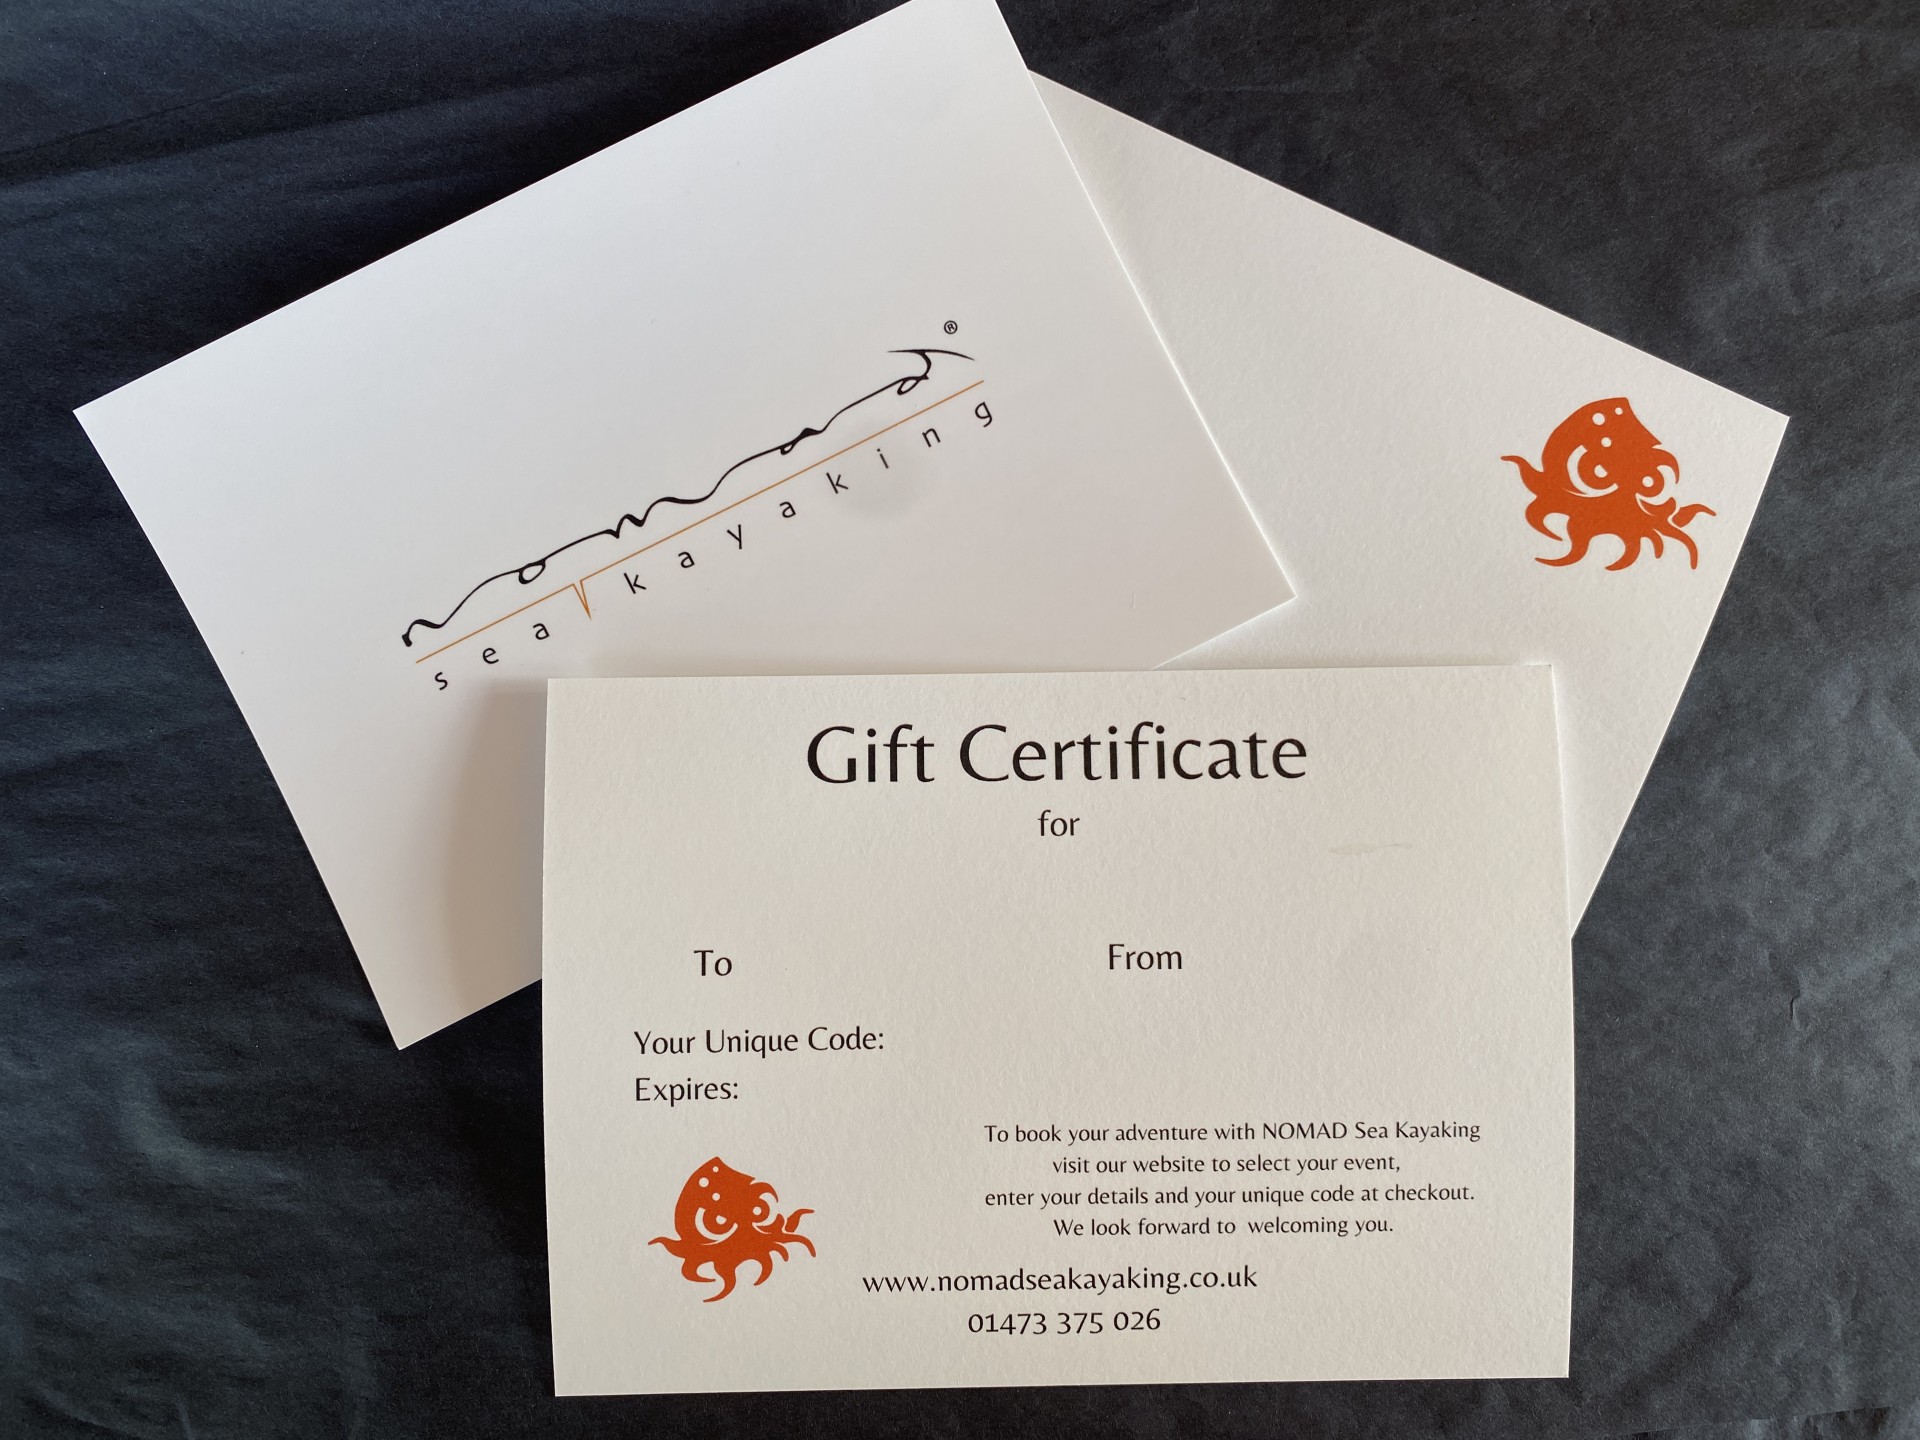 Gift wrapped gift certificate for kayaking courses and trips in Suffolk.